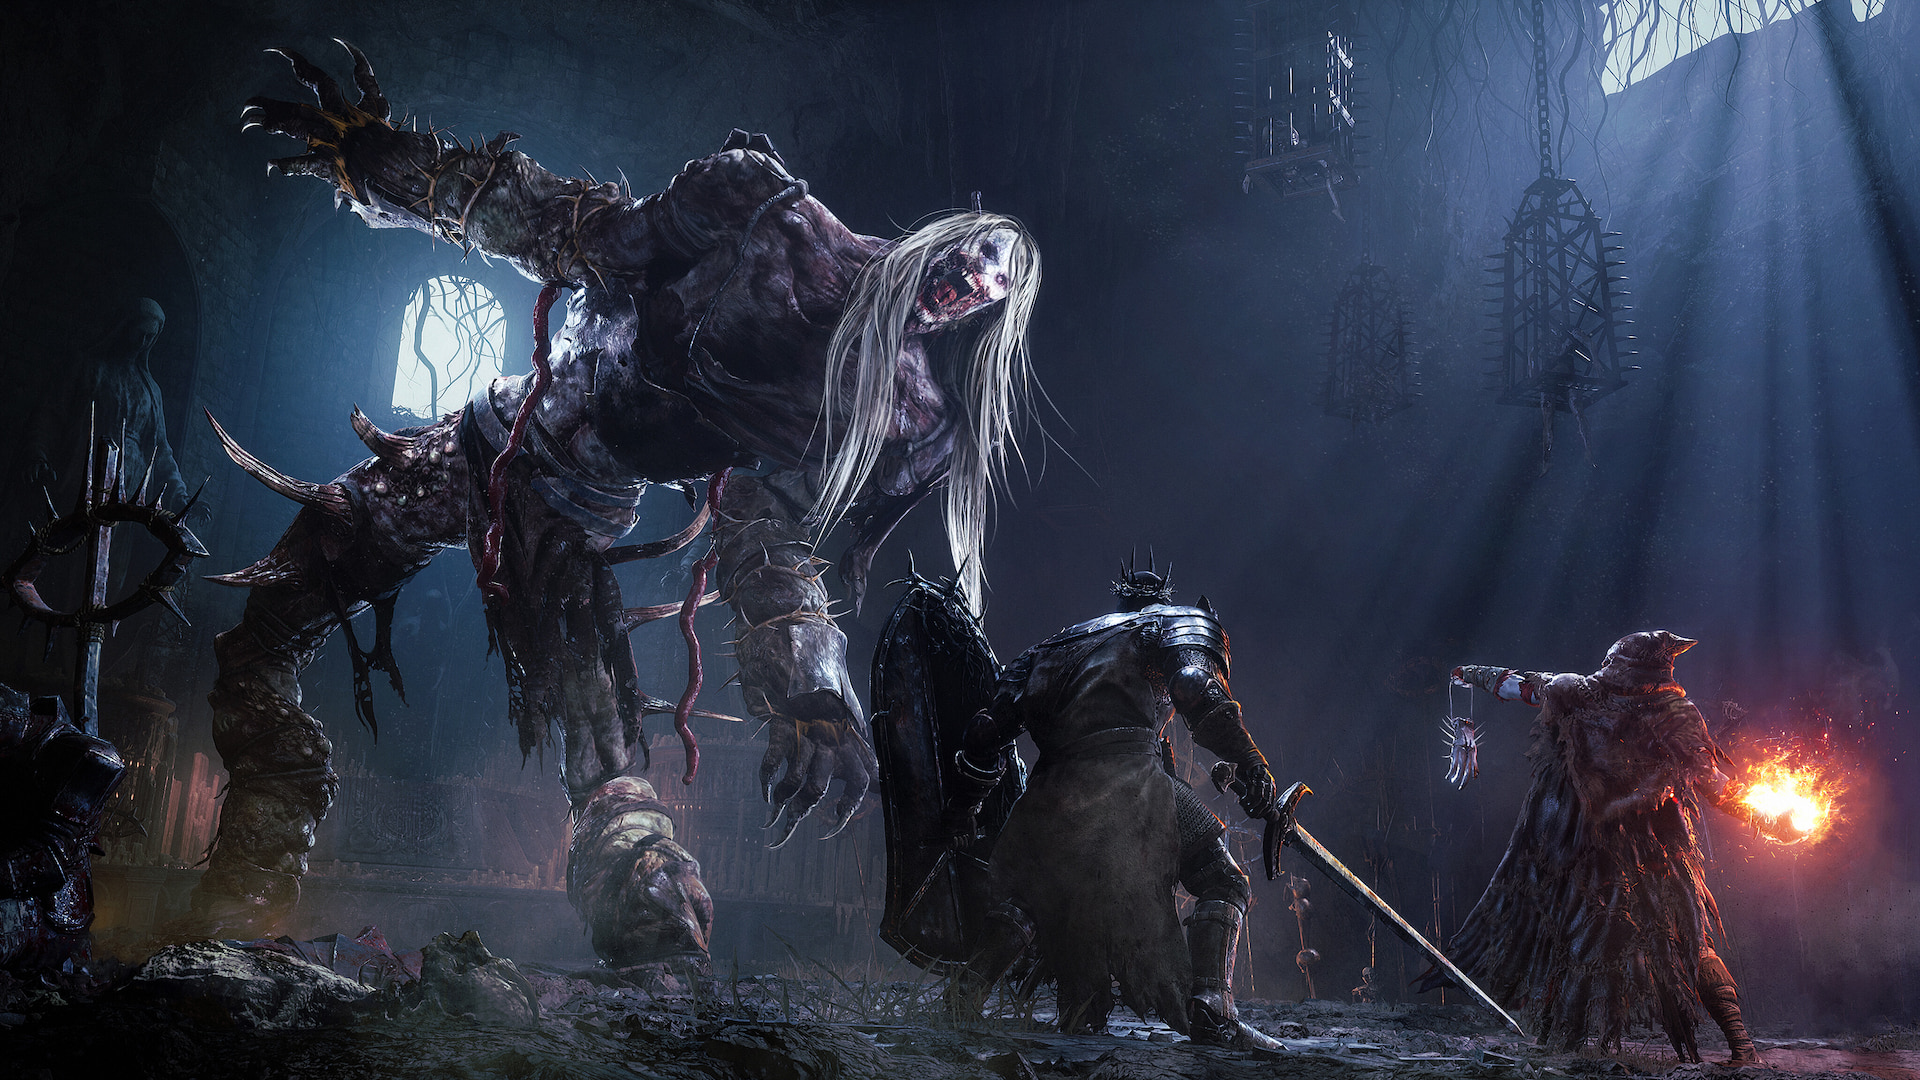 Lords of the Fallen review – faltering in its execution